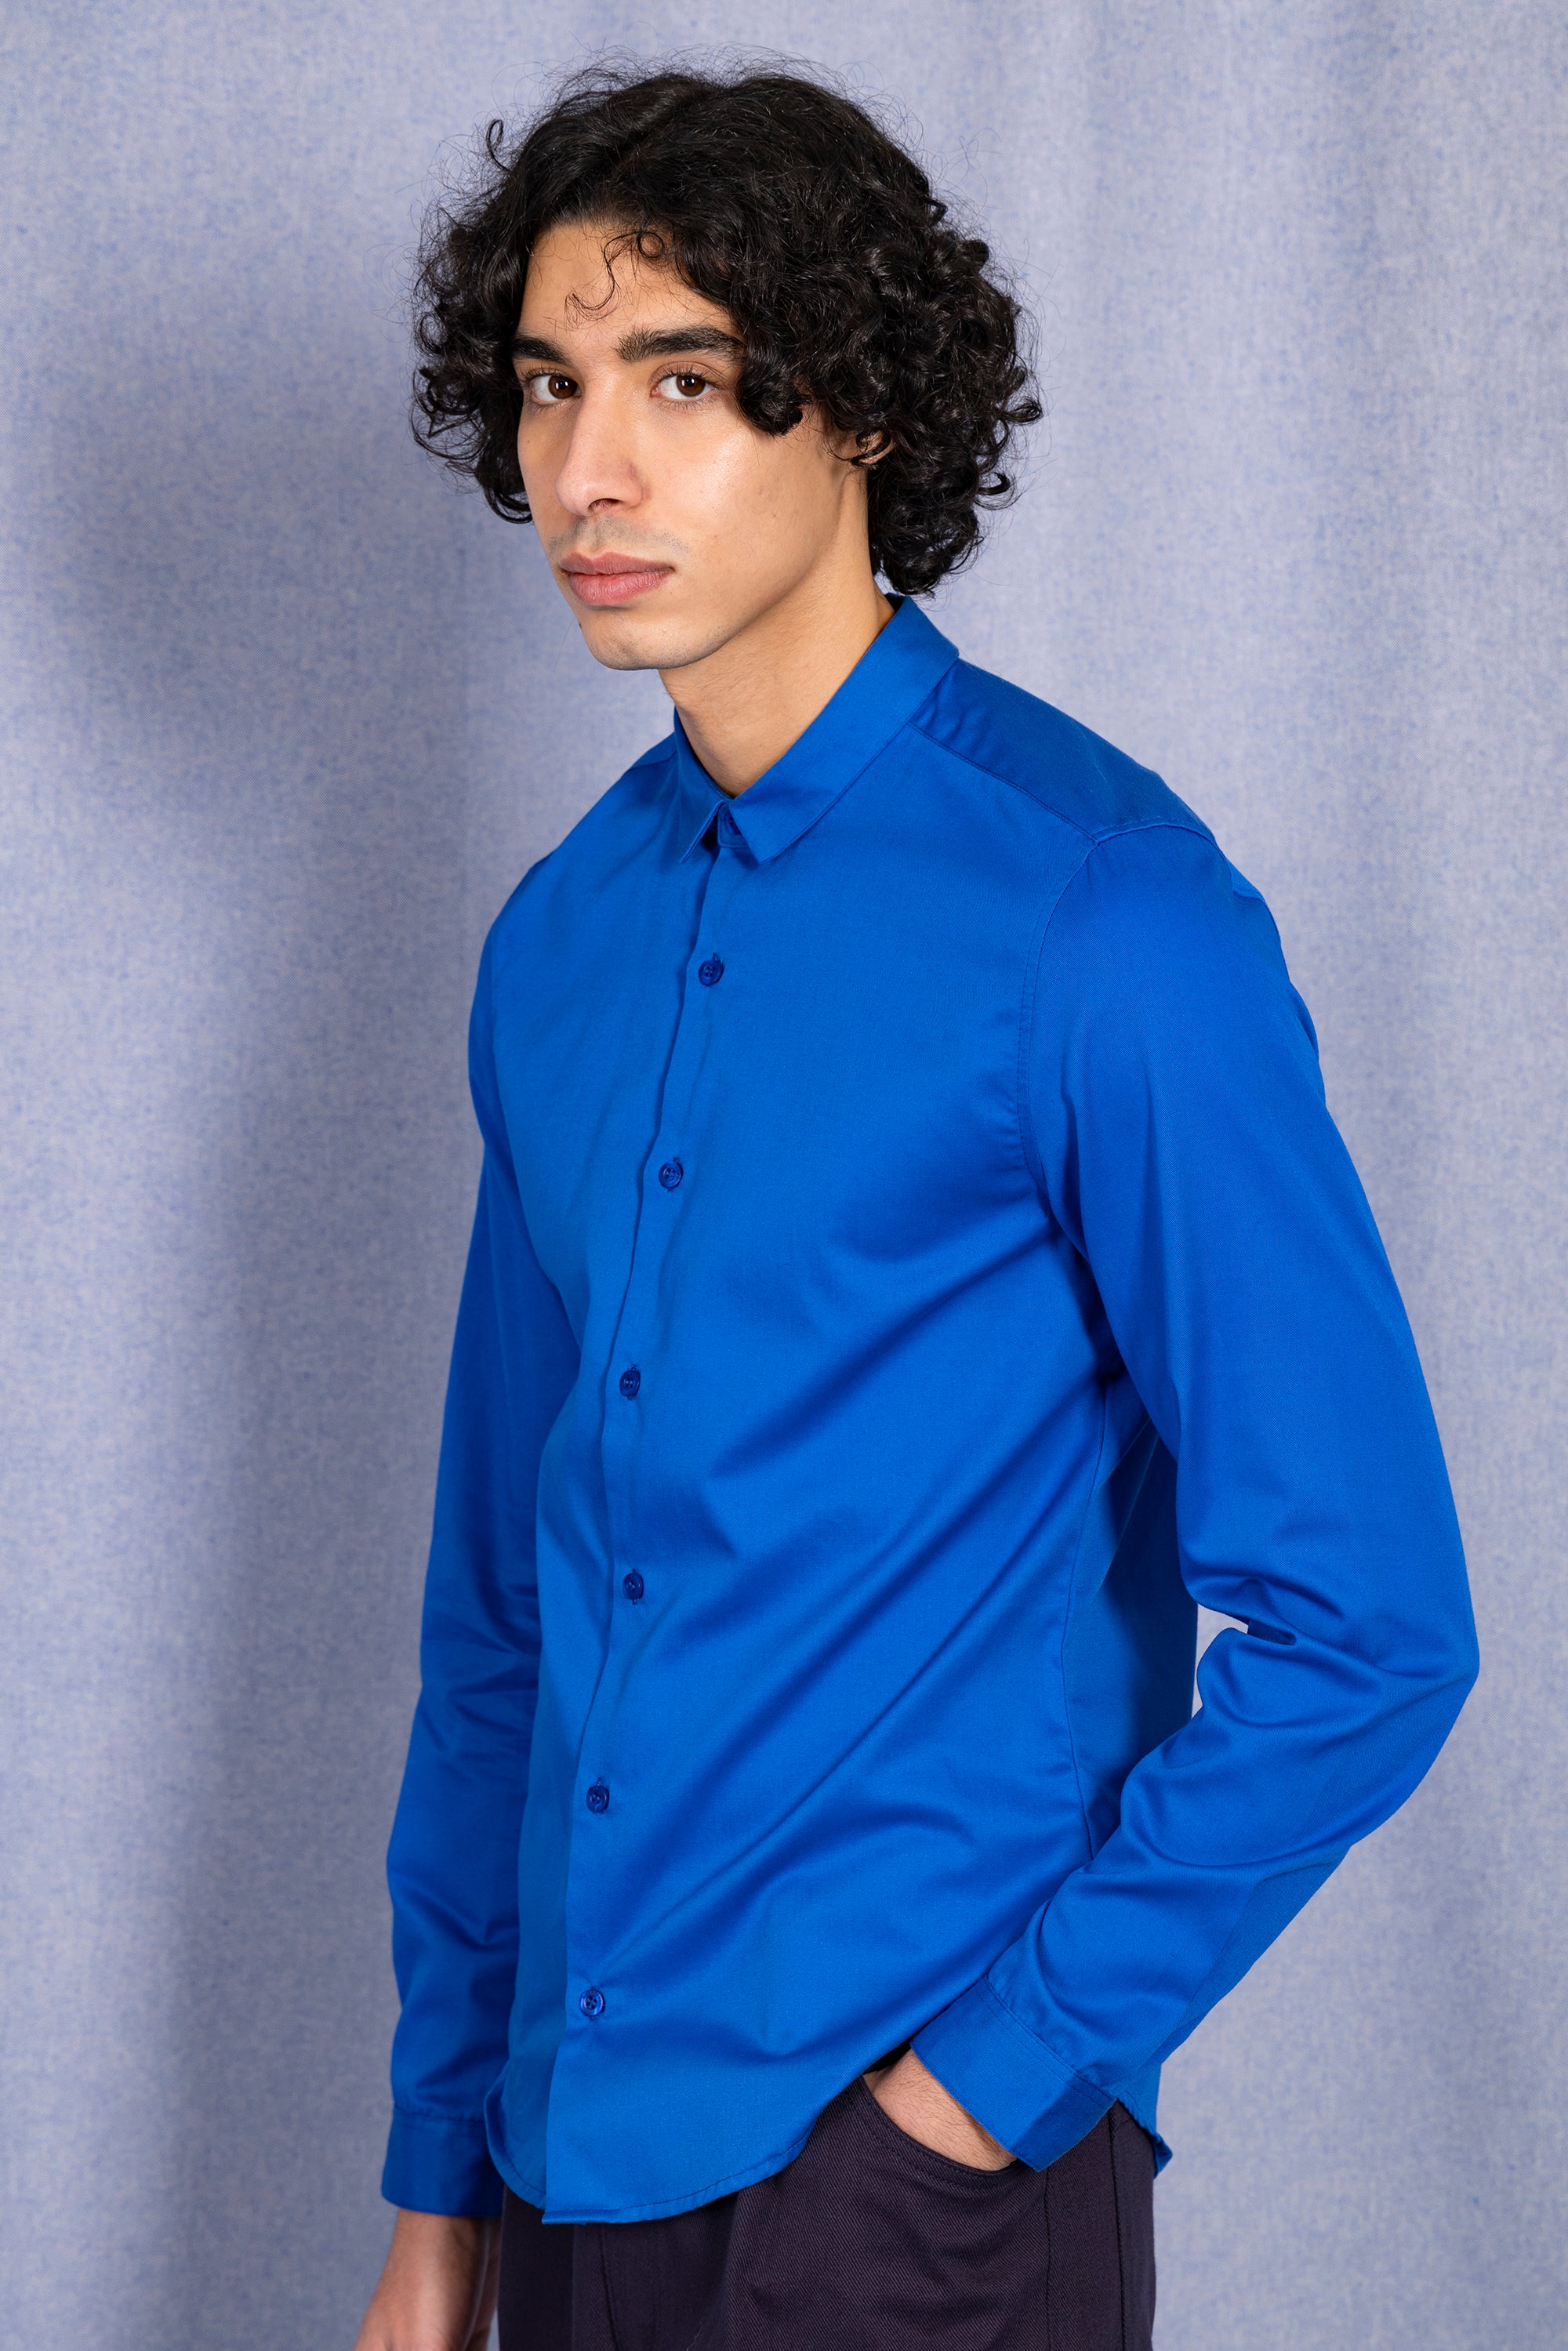 Sapphire blue shirt for men, light cotton, modern ethical fashion, casual chic